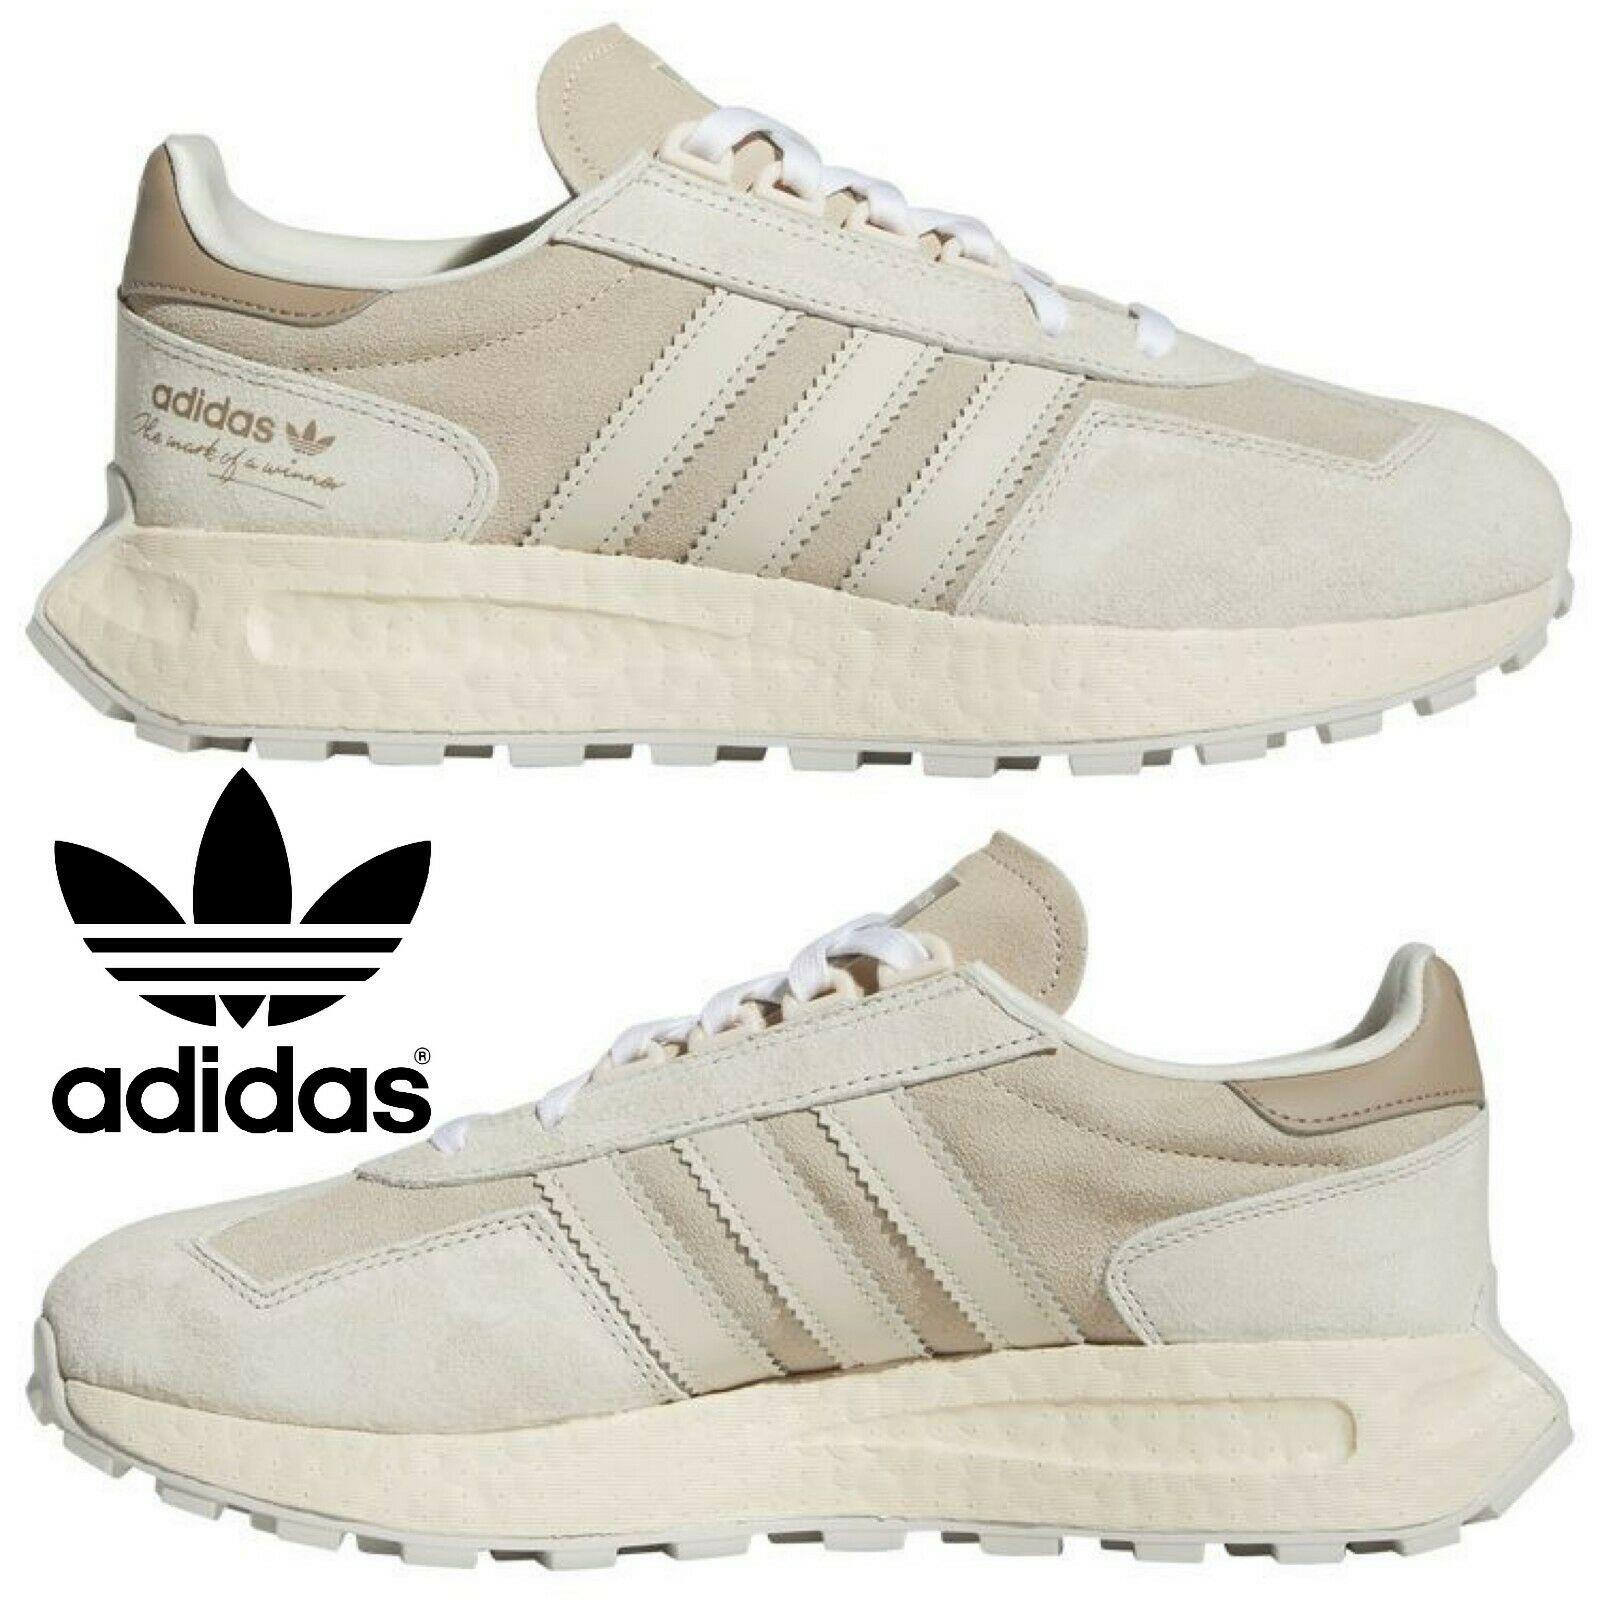 Adidas Retropy E5 Men`s Sneakers Running Shoes Gym Casual Sport Beige Brown - Beige , Clear Brown/Chalk Brown Manufacturer